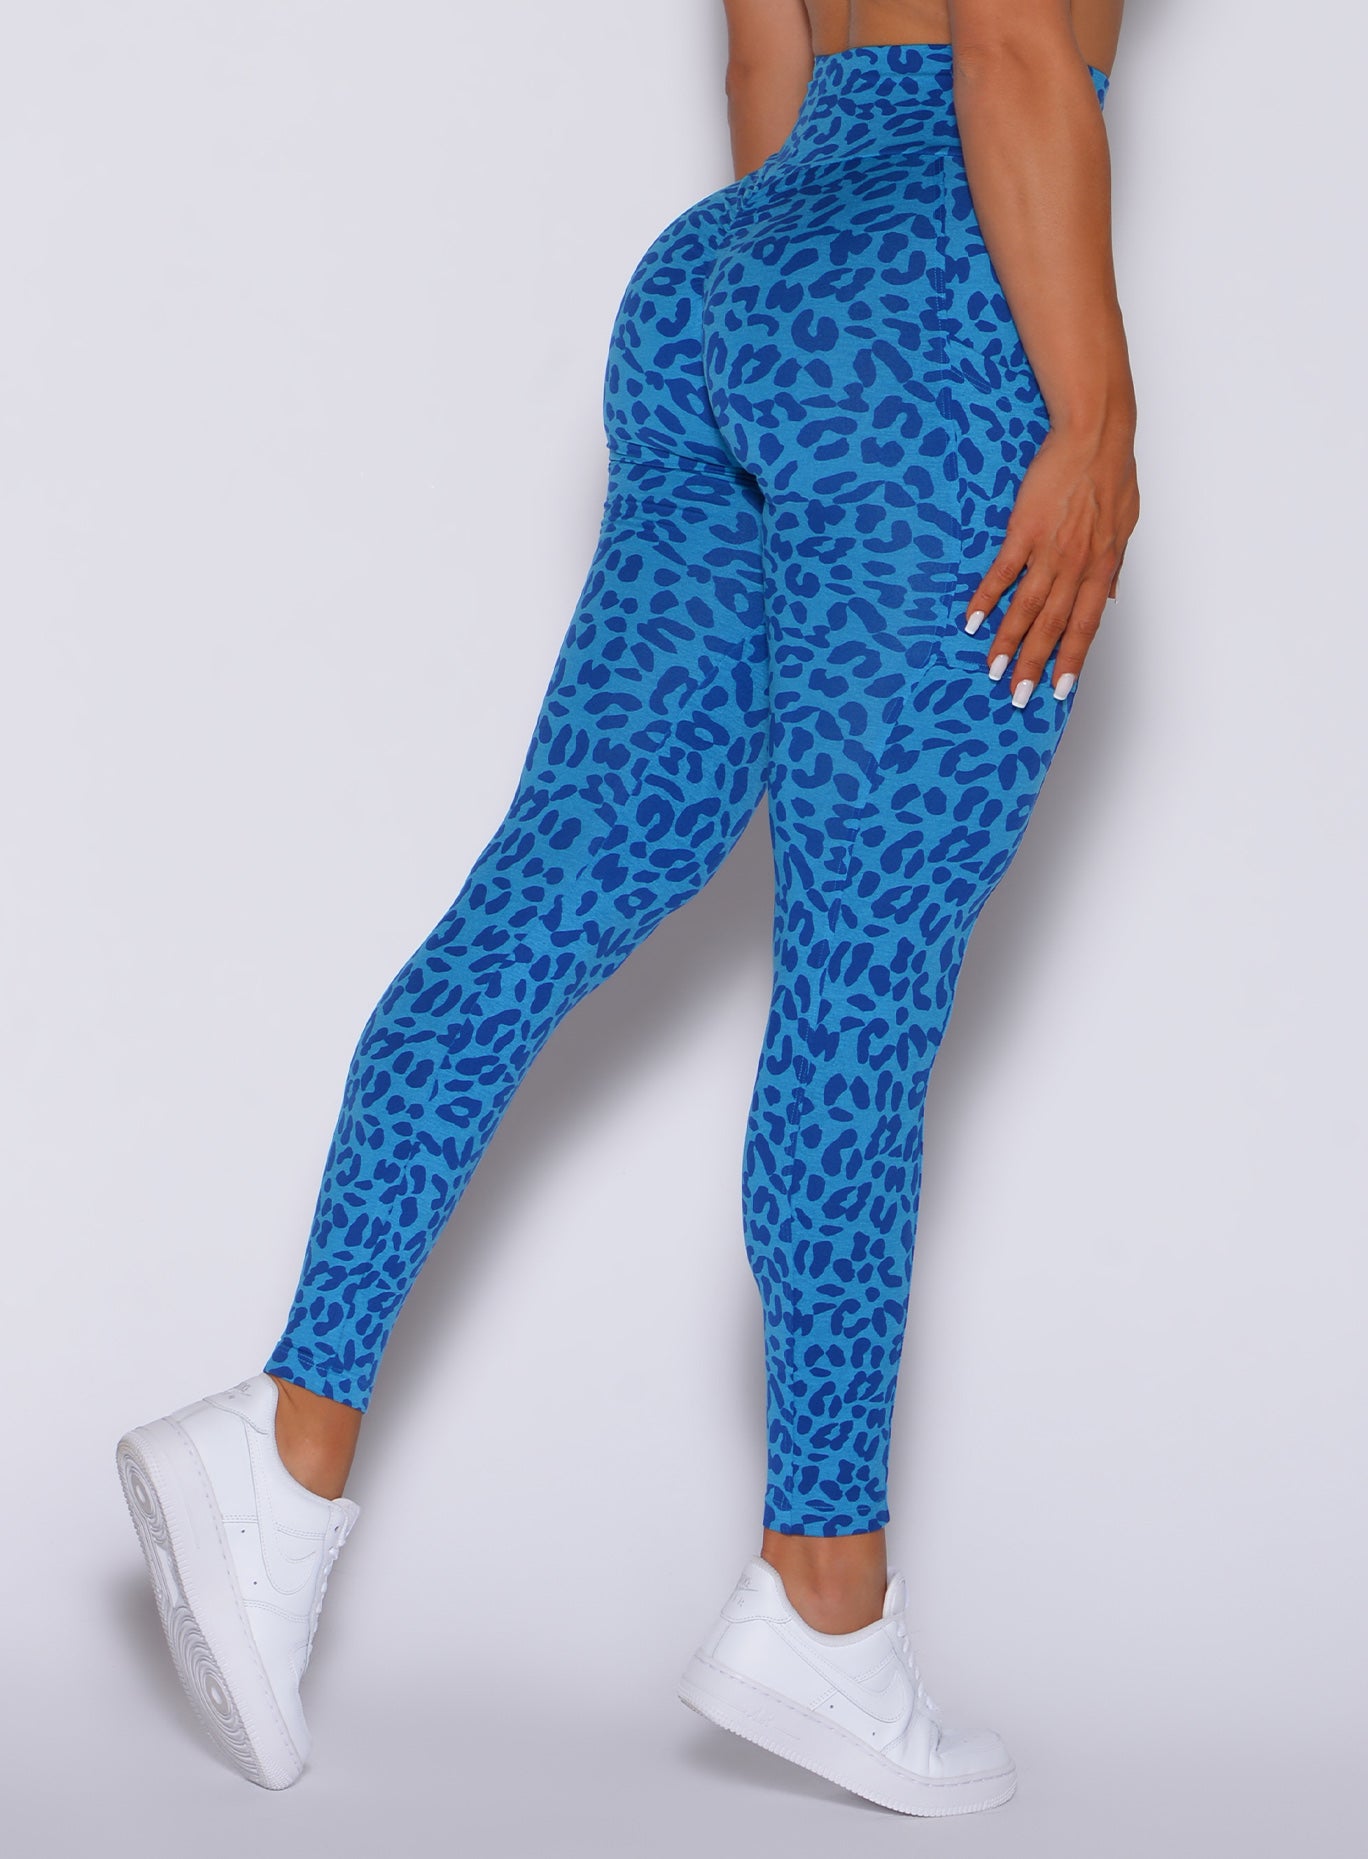 Zoomed in back view of our curves leggings in blue cheetah color 